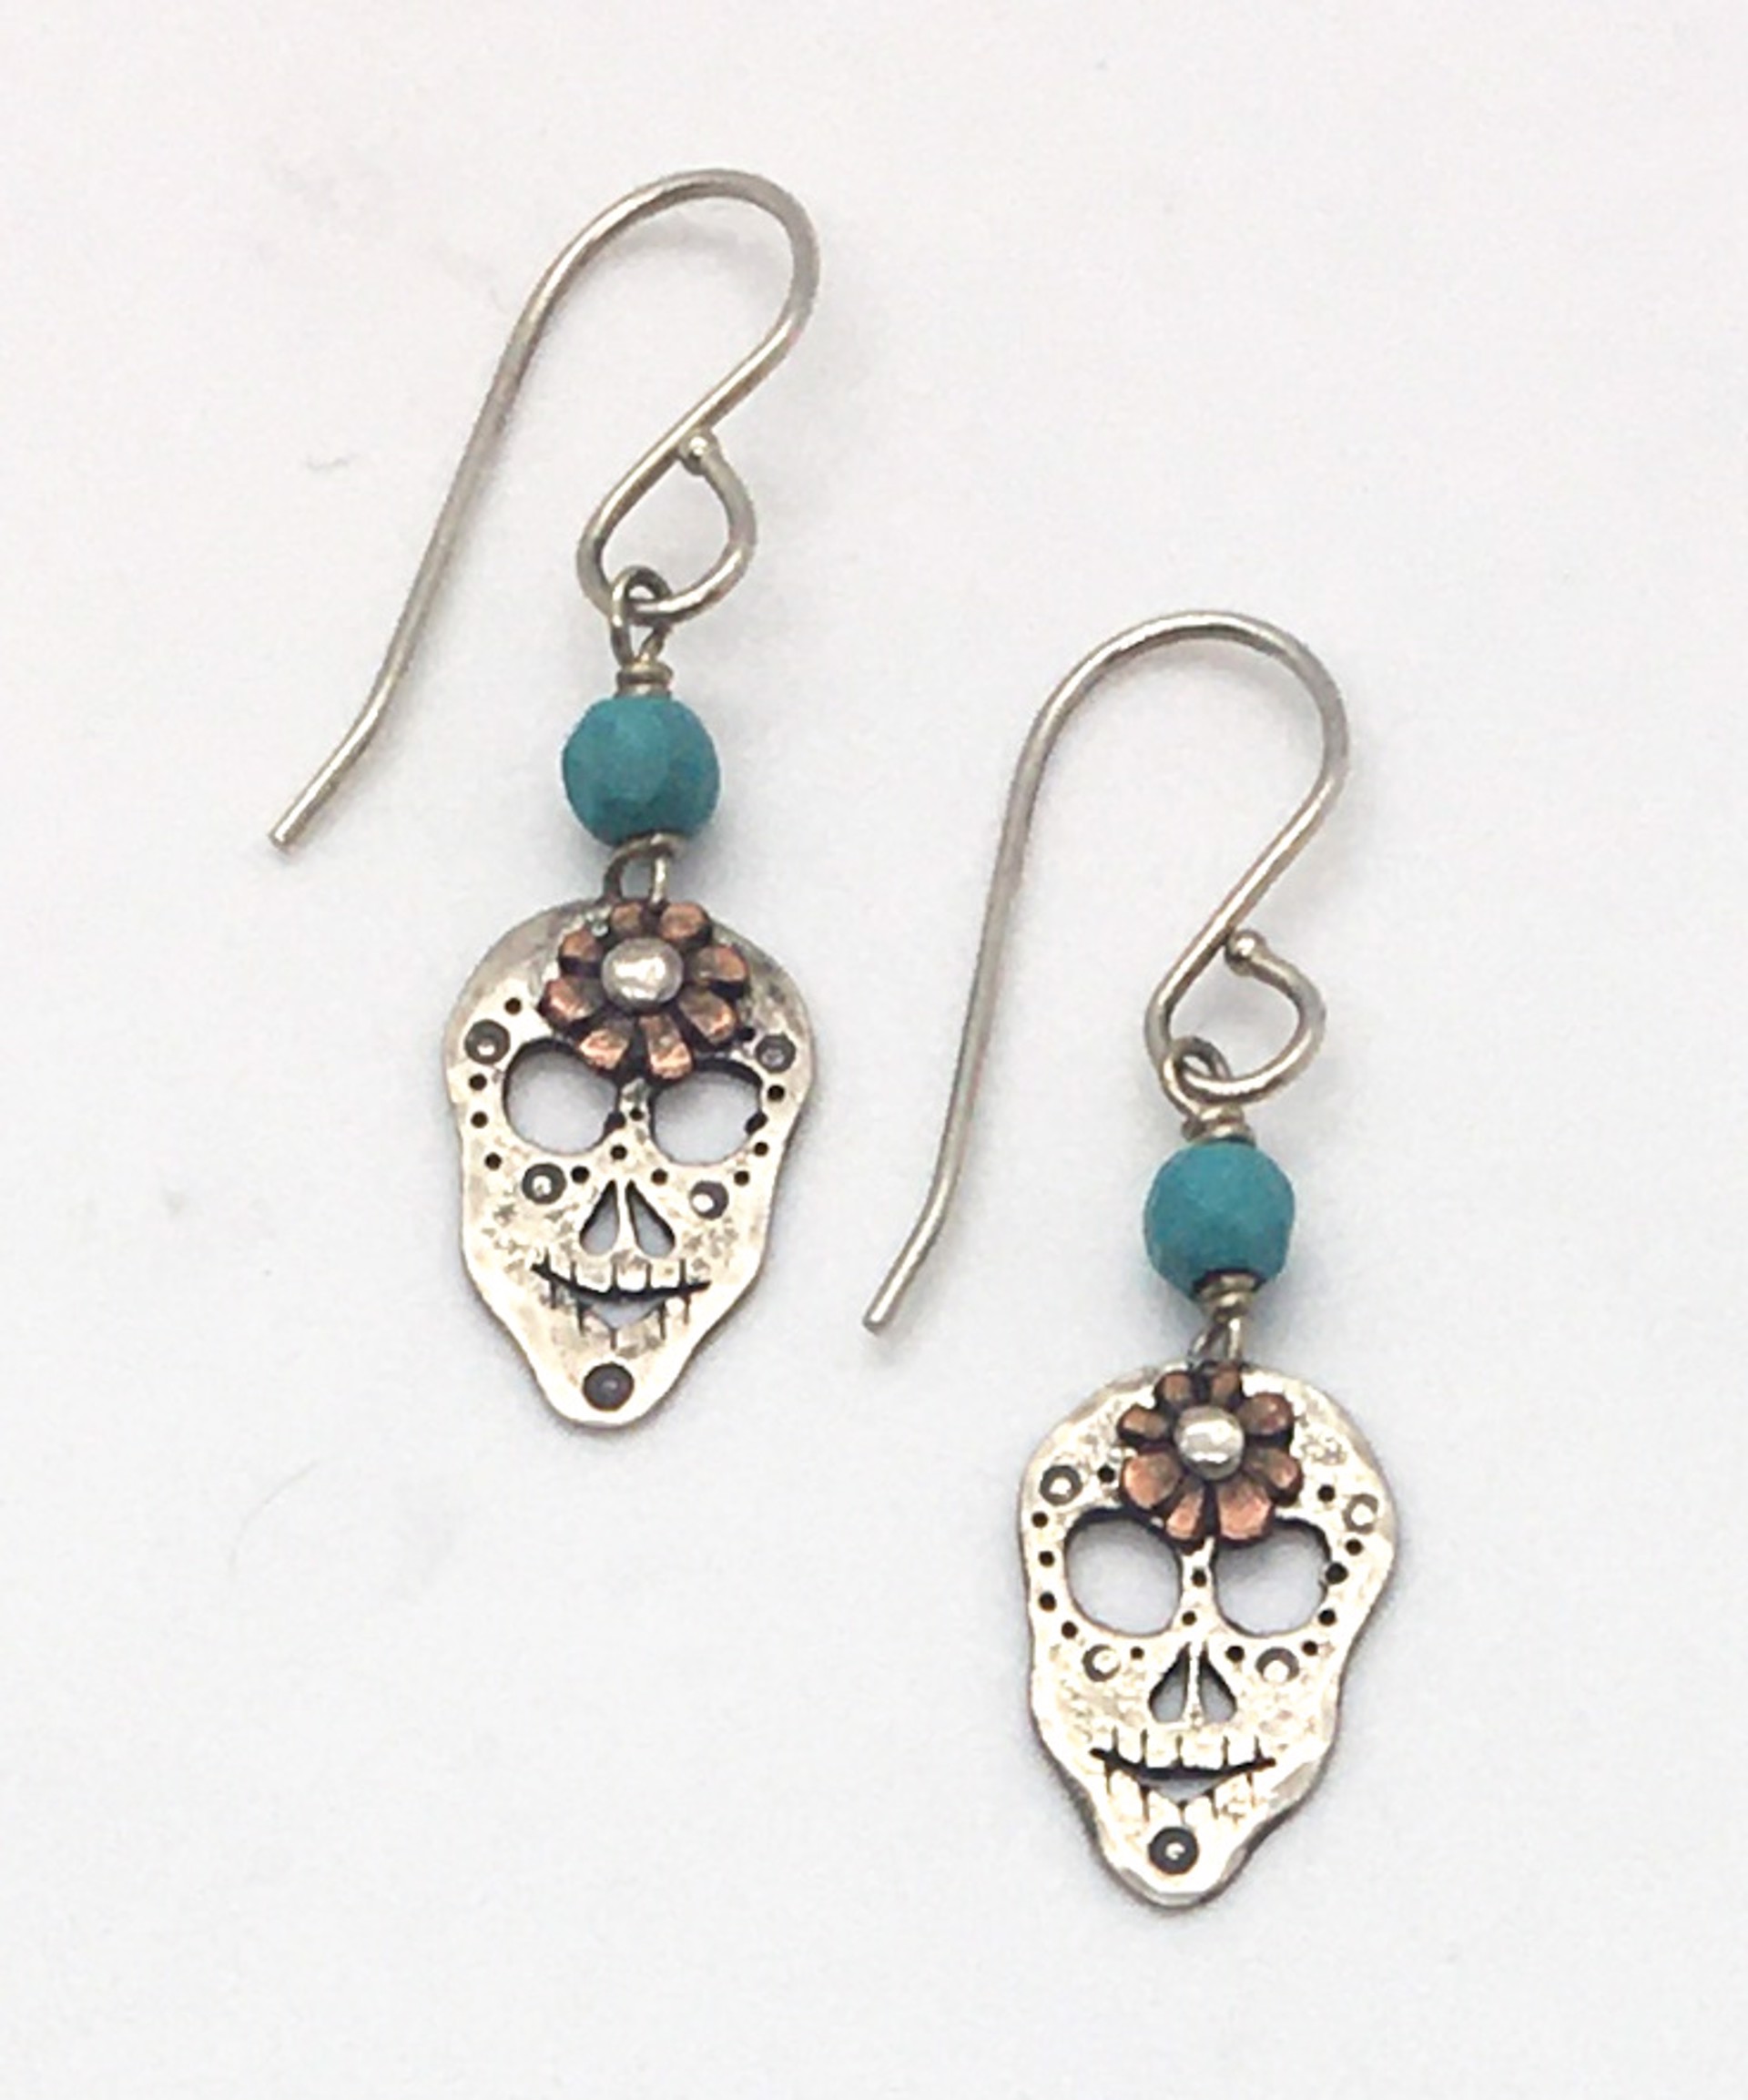 Handmade Riveted Silver and Copper with Turquoise Sugar Skull Earrings by Grace Ashford